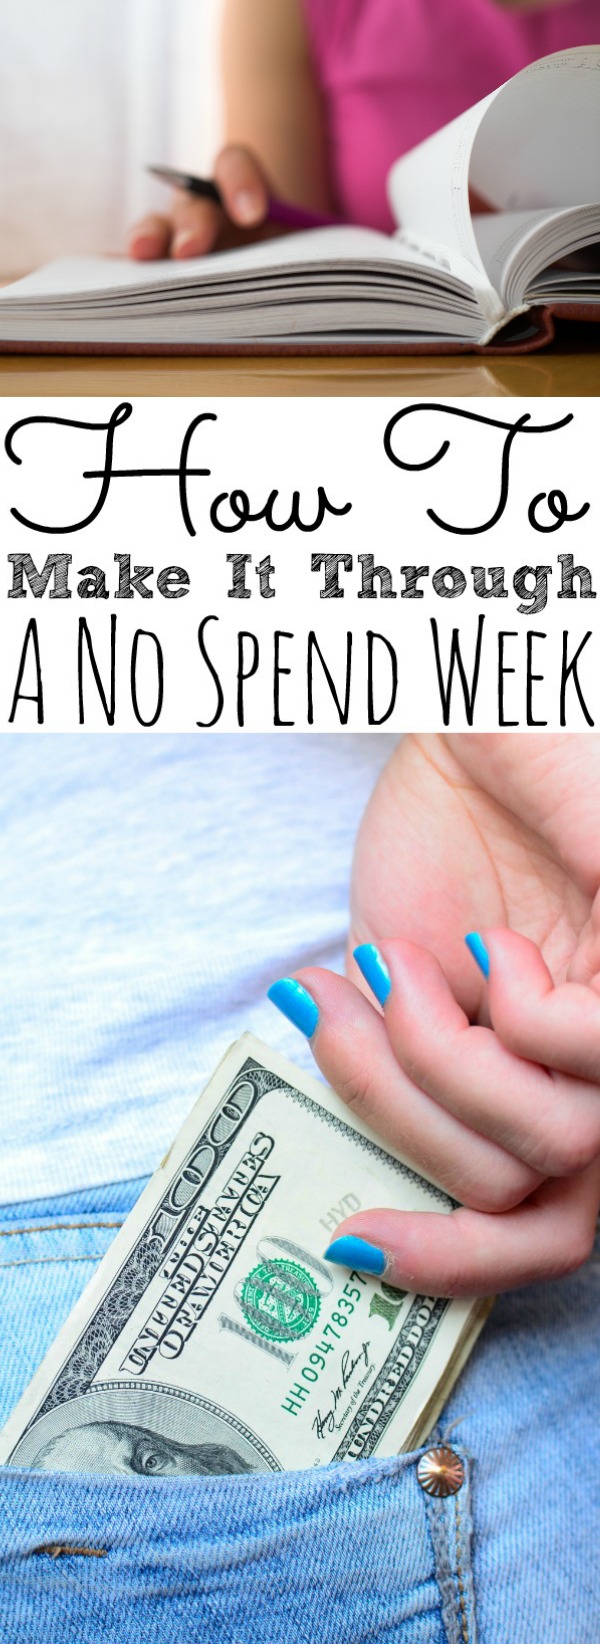 How To Make It Through A No Spend Week